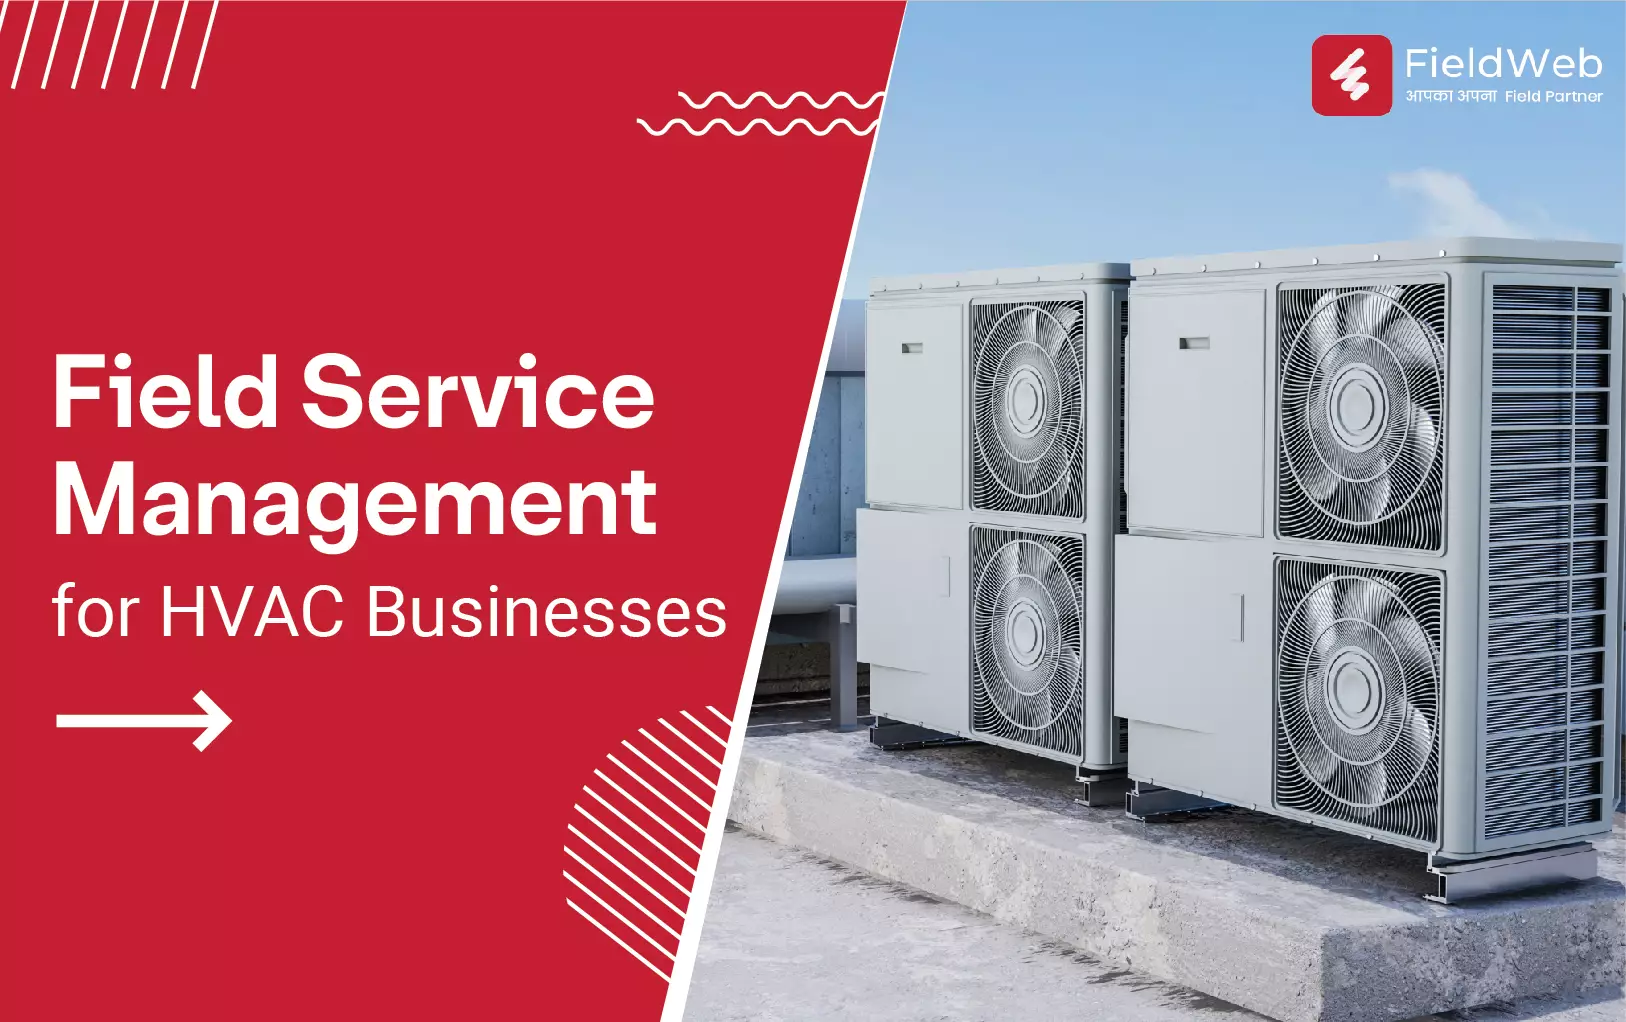 The image shows an HVAC systems in a professional setting, and other half of the image is covered in red and white text detailing services.